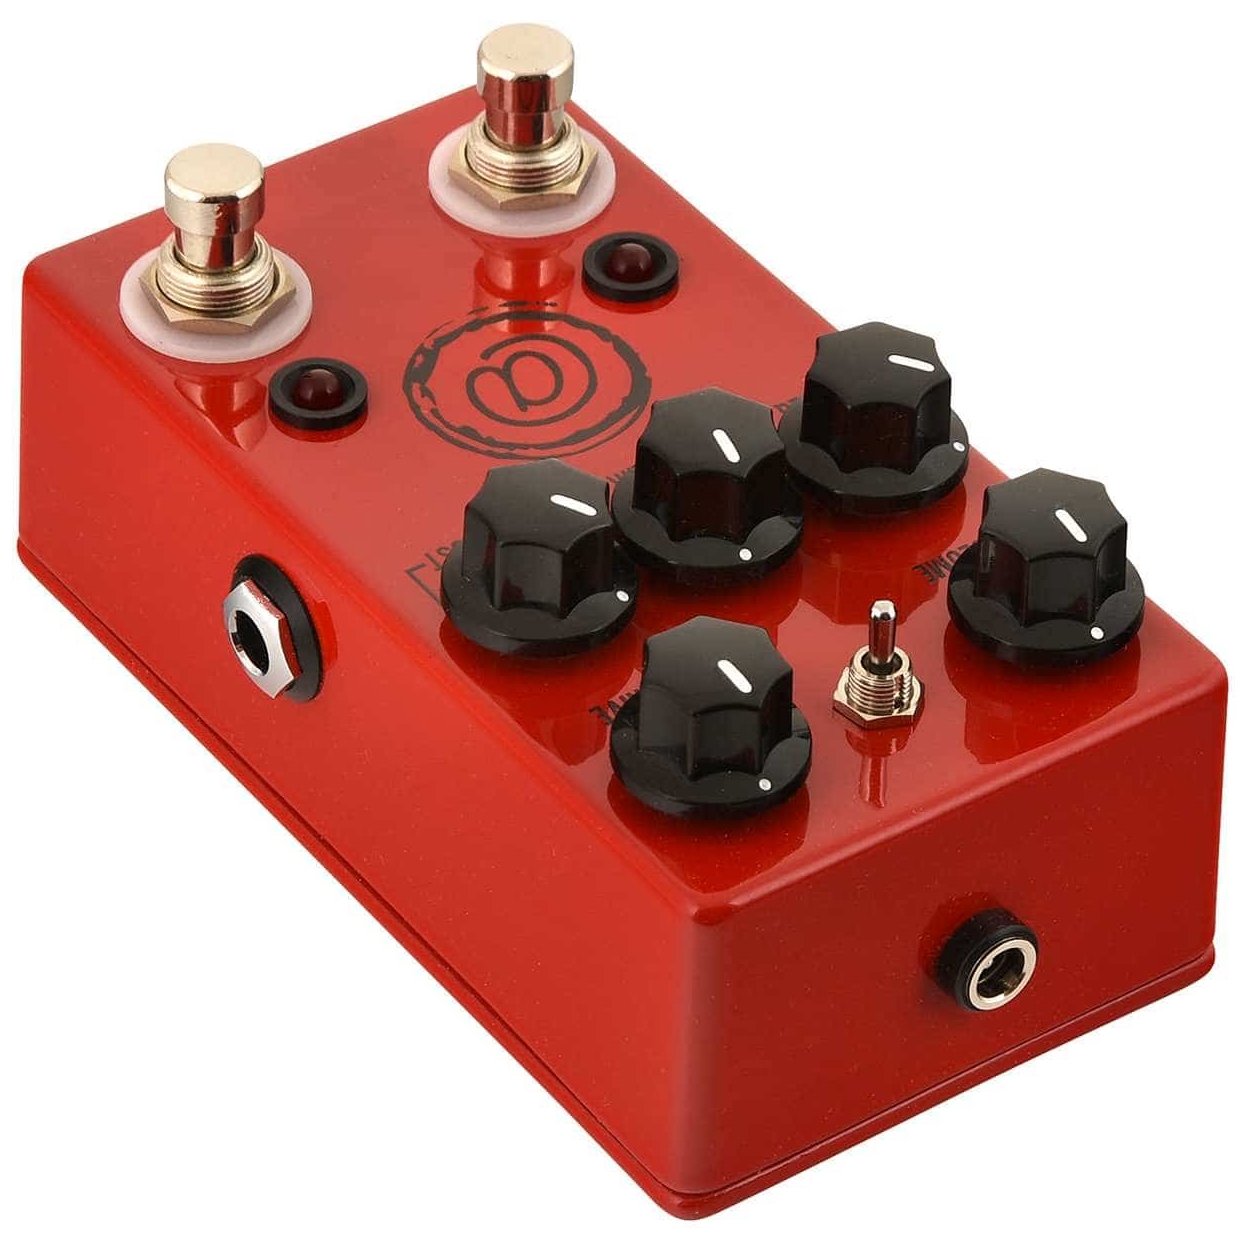 JHS Pedals The AT+ Andy Timmons Signature Pedal